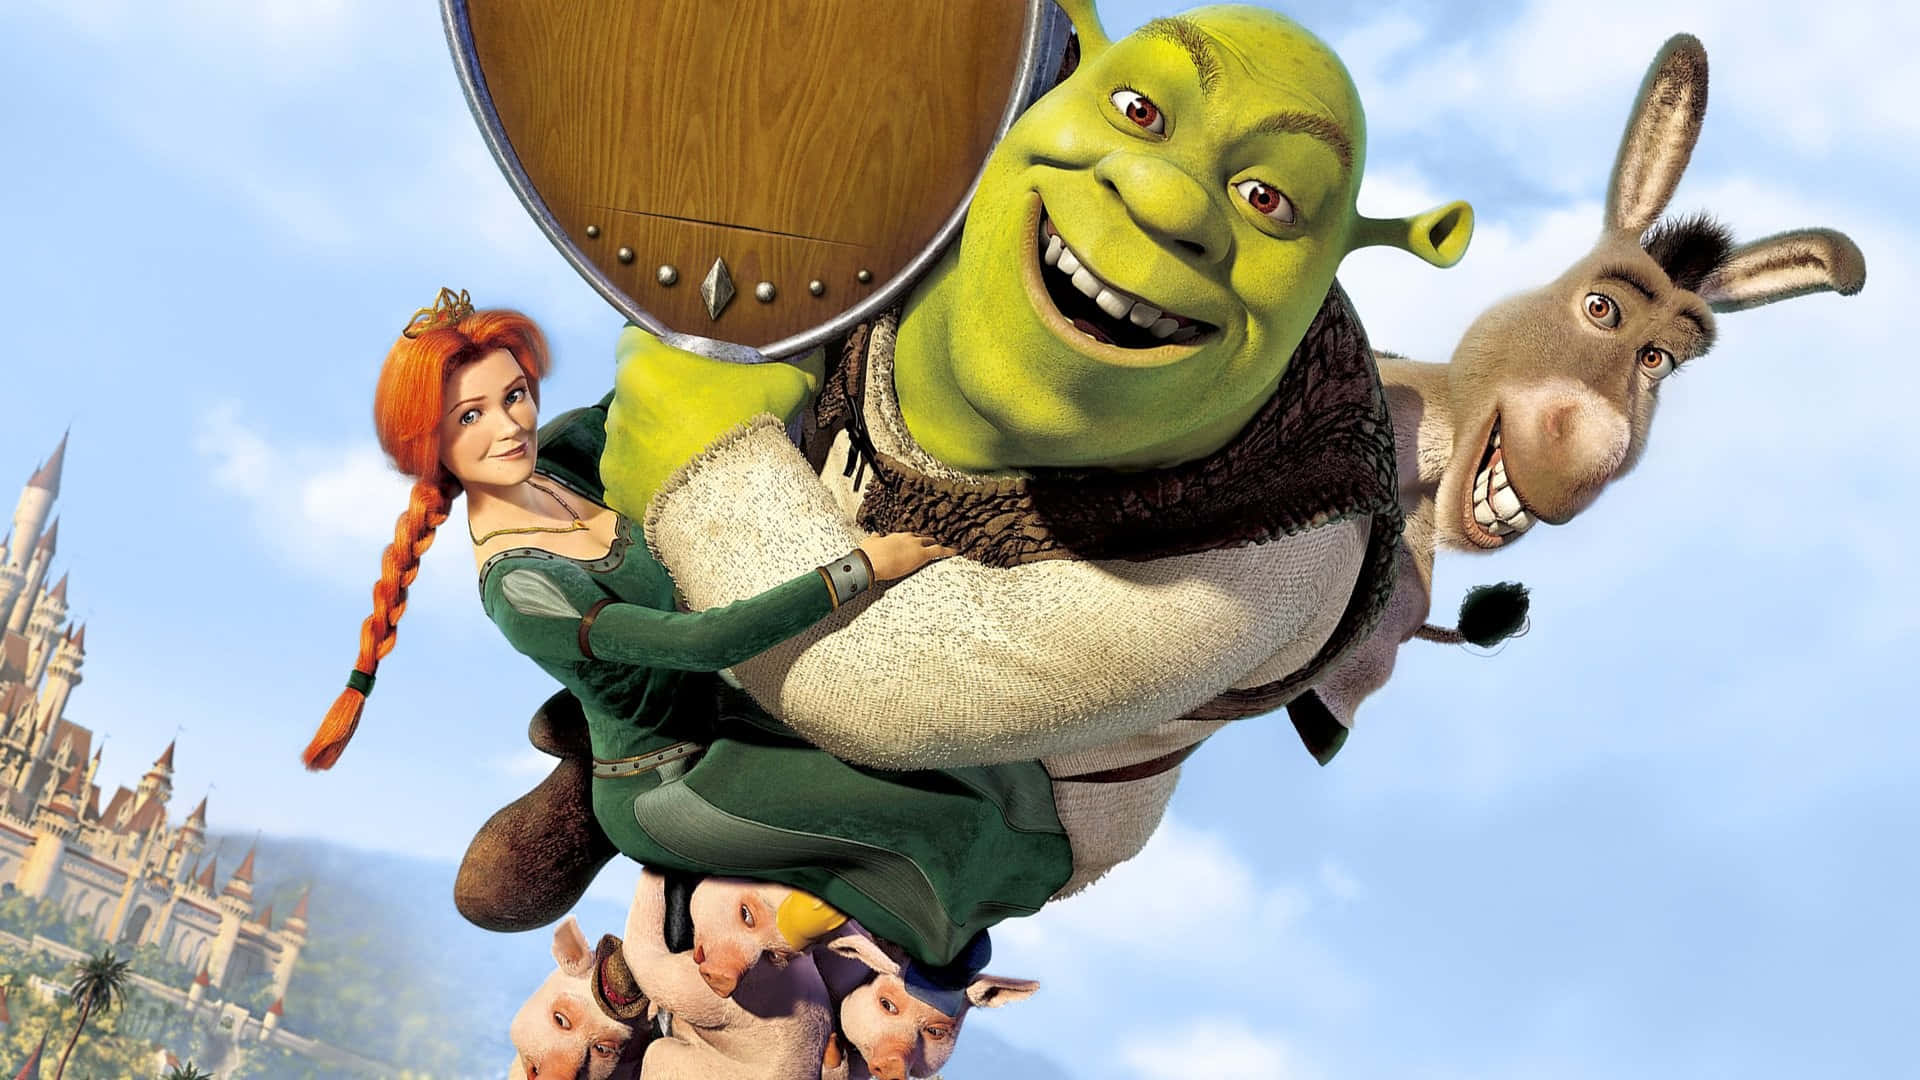 Let loose and have some fun with Shrek! Wallpaper